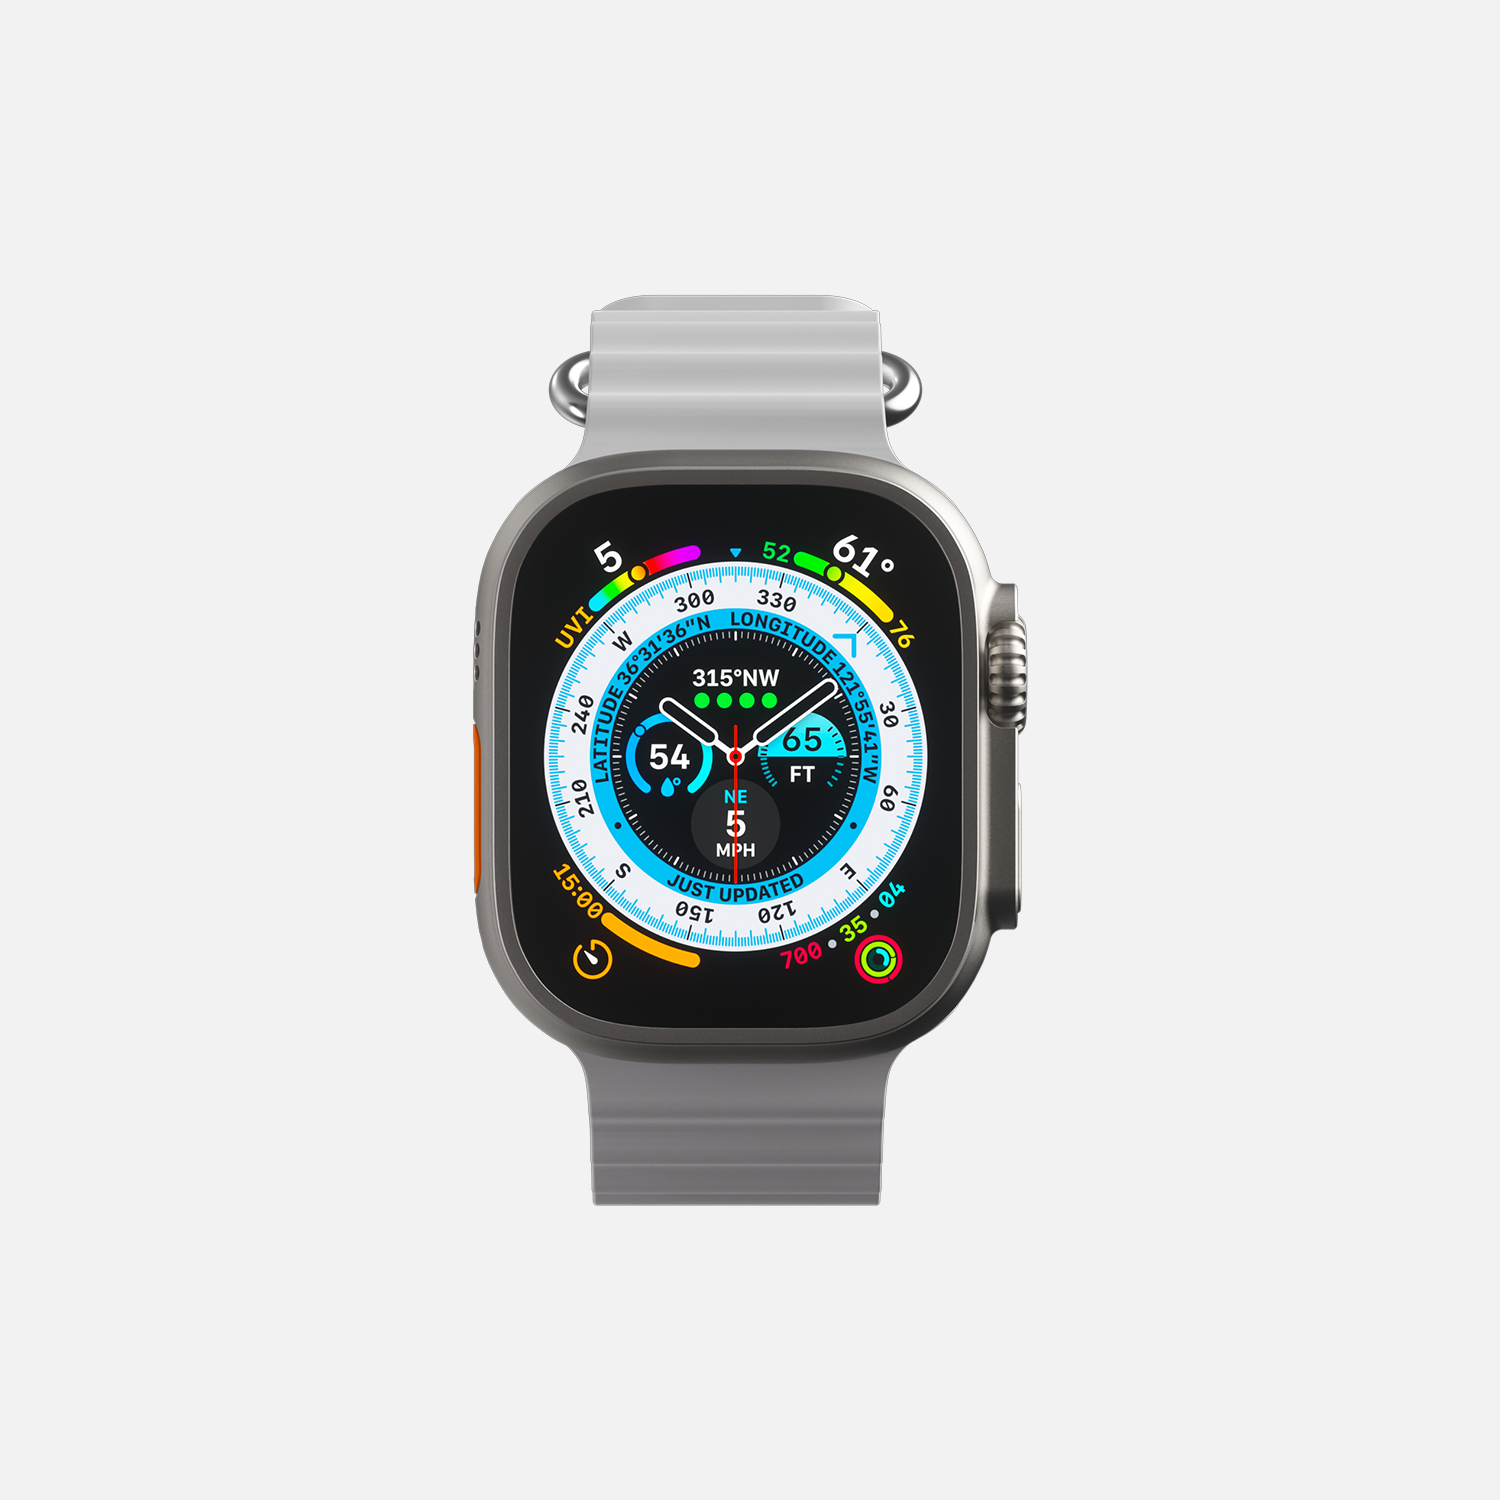 Silver smartwatch with white sports band display on white background.